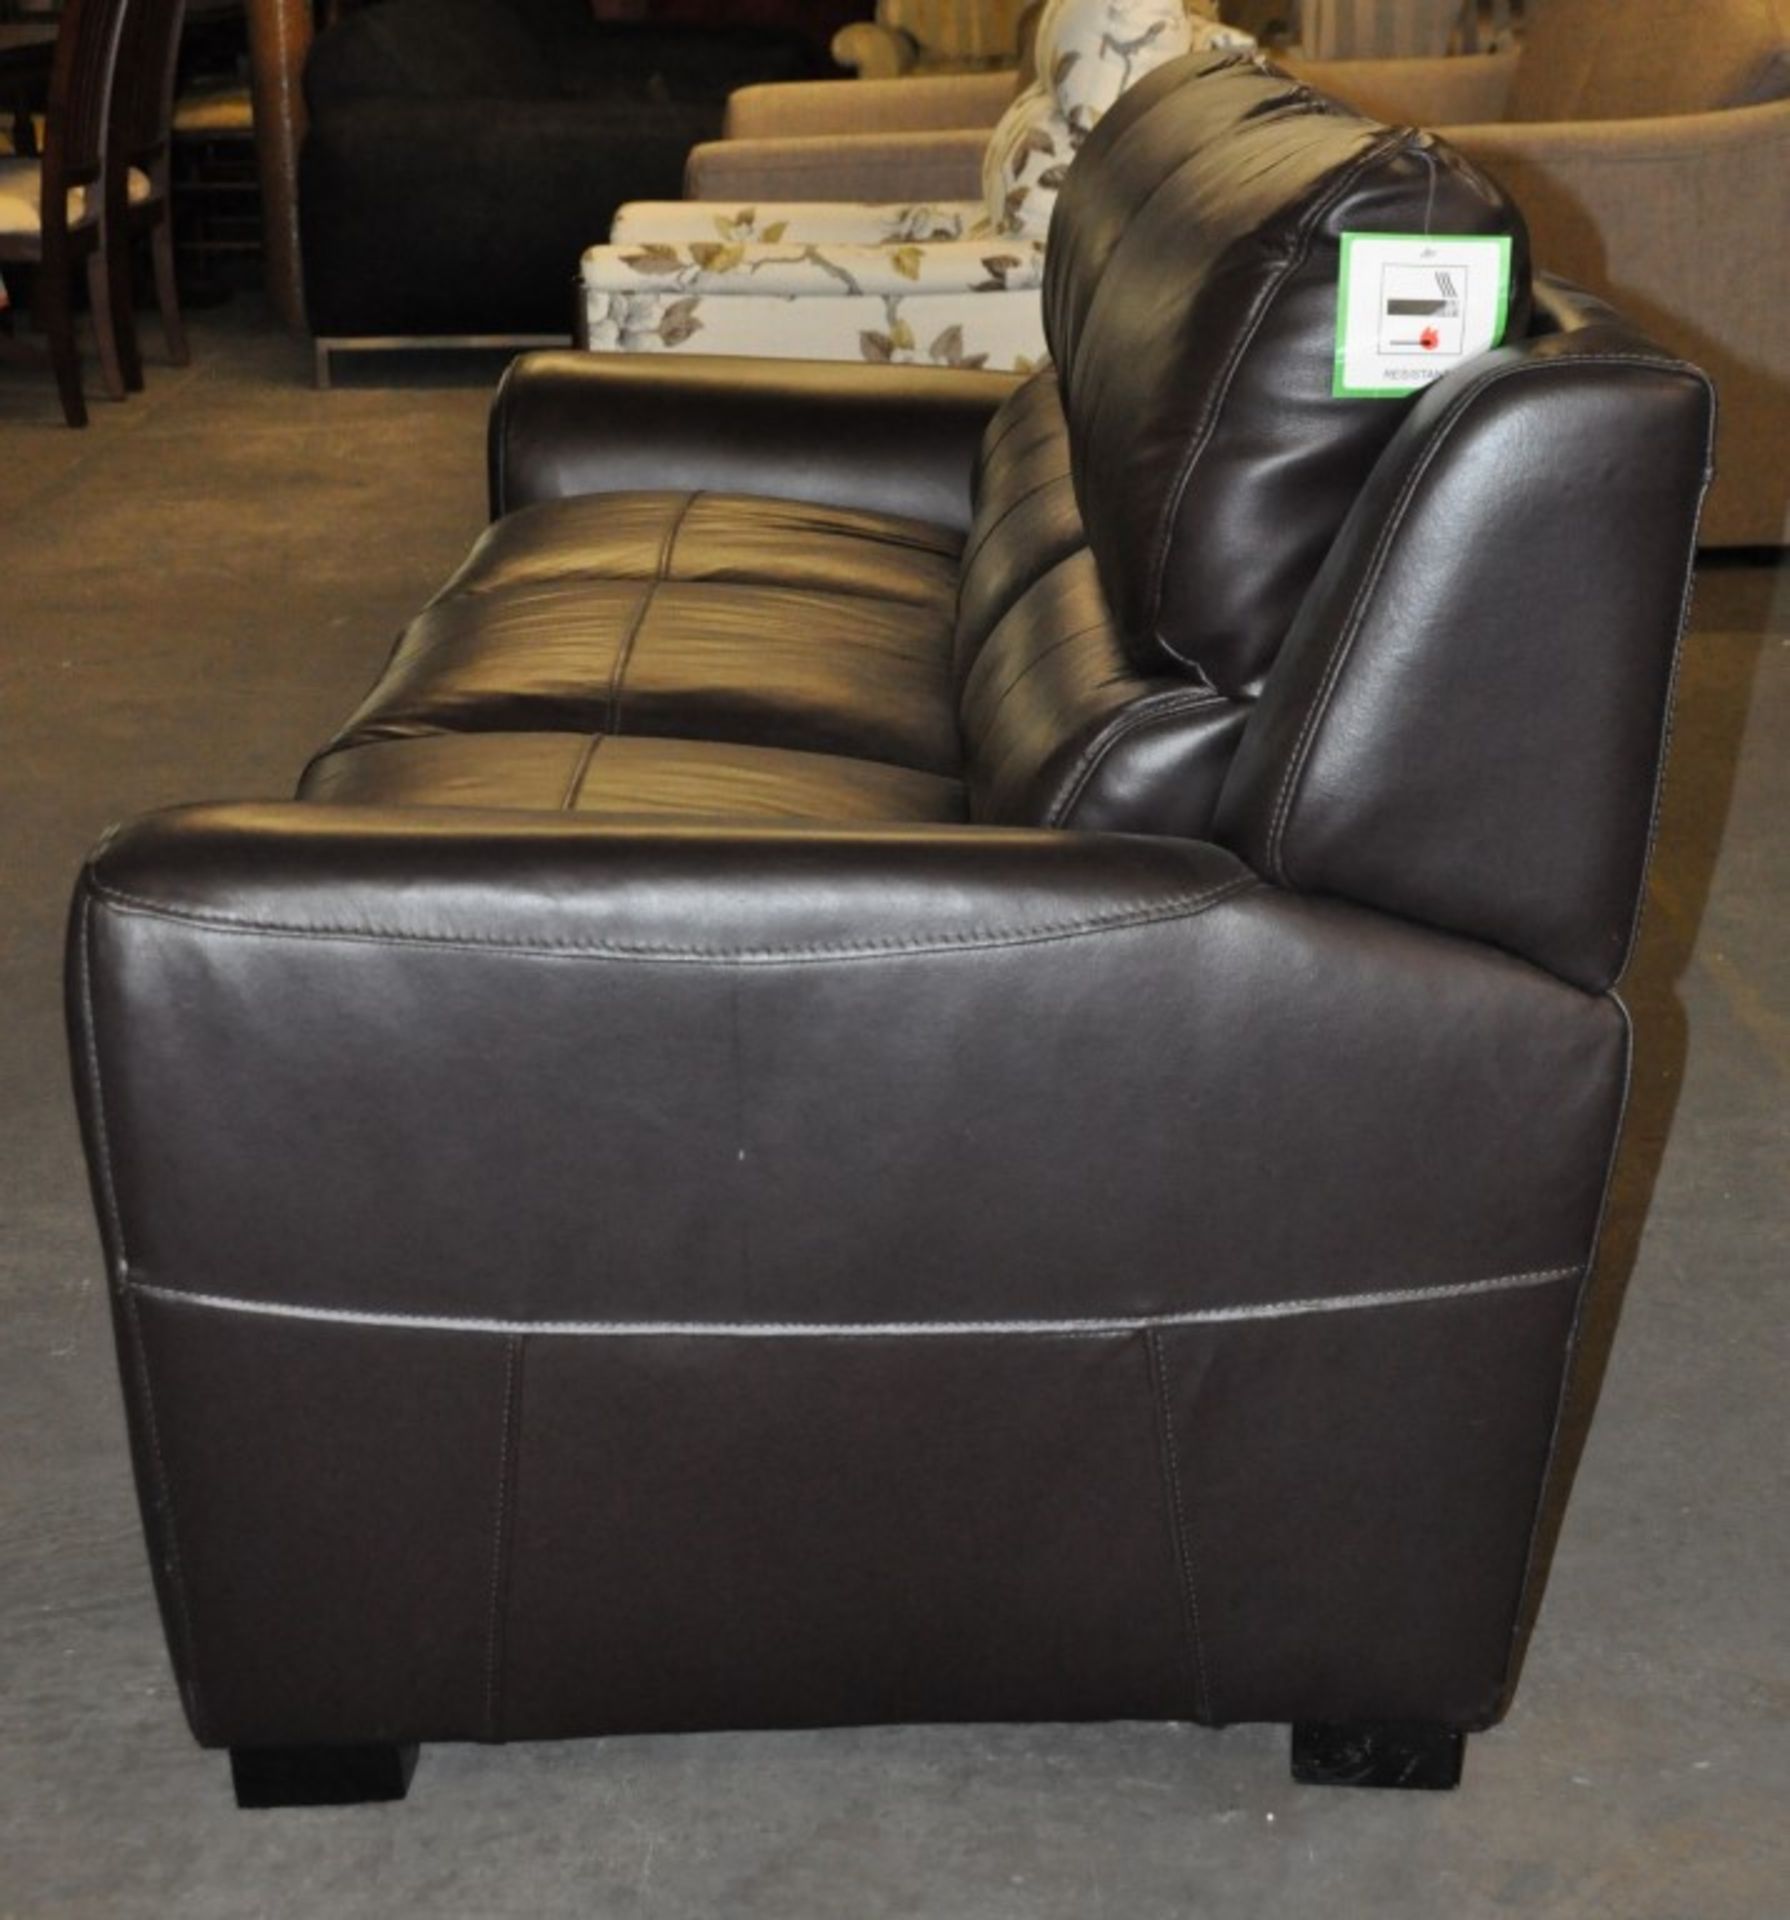 1 x Genuine Leather 3 Seater Sofa in Chocolate Brown – Design by Mark Webster – Ex Display - - Image 3 of 5